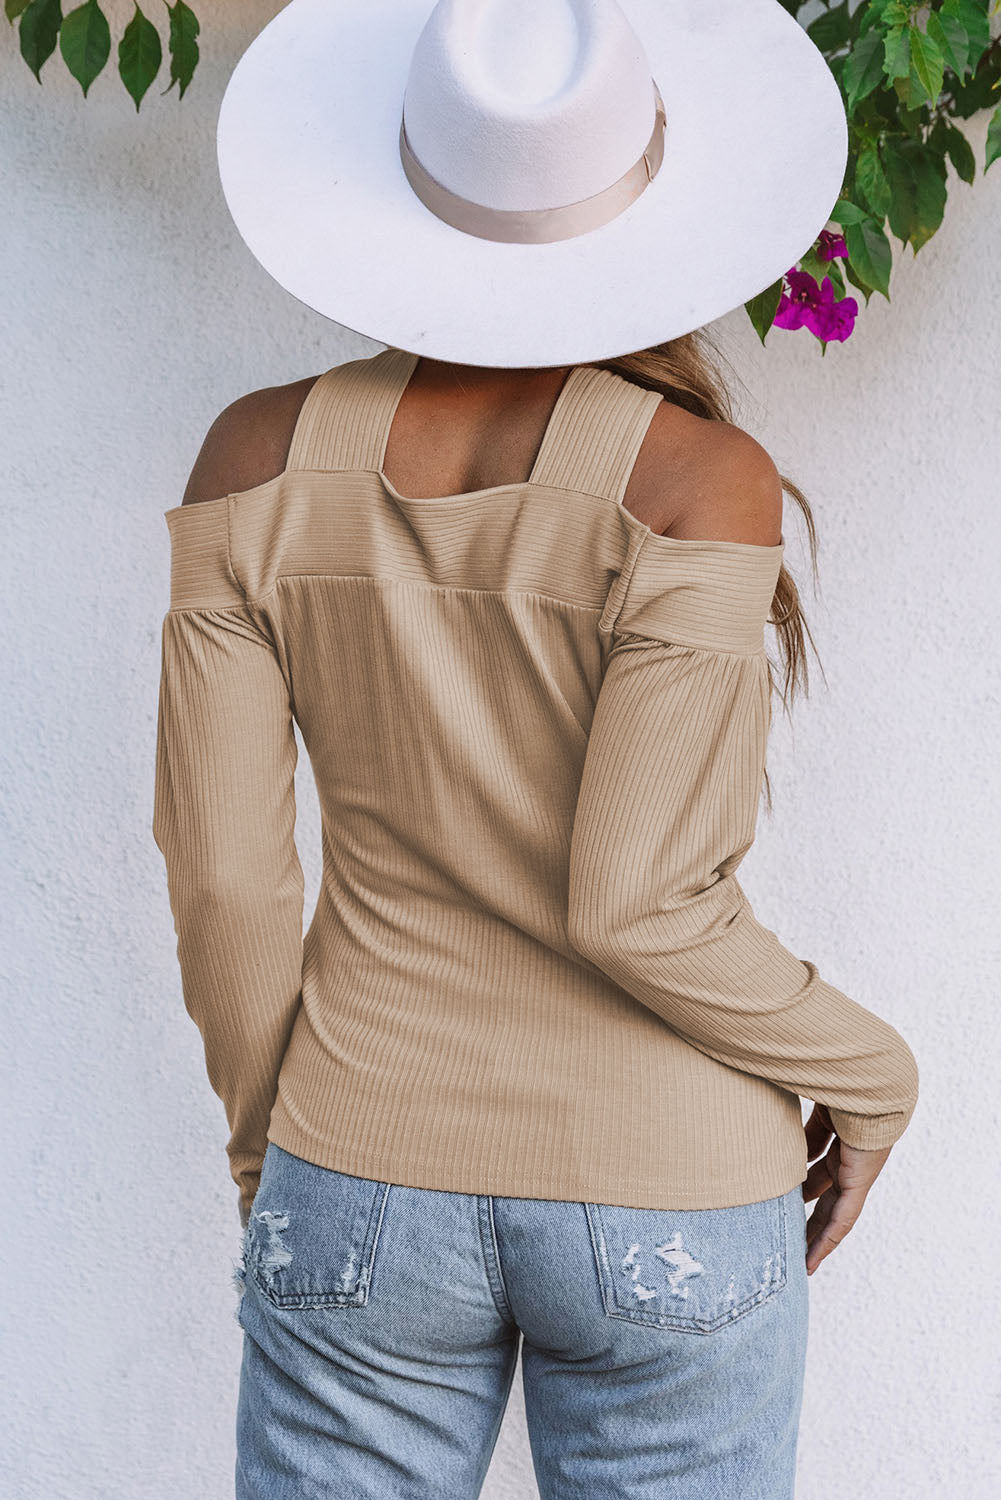 Apricot Cut Out Criss Cross Cold Shoulder Ribbed Top – Tack-M-Up Stables